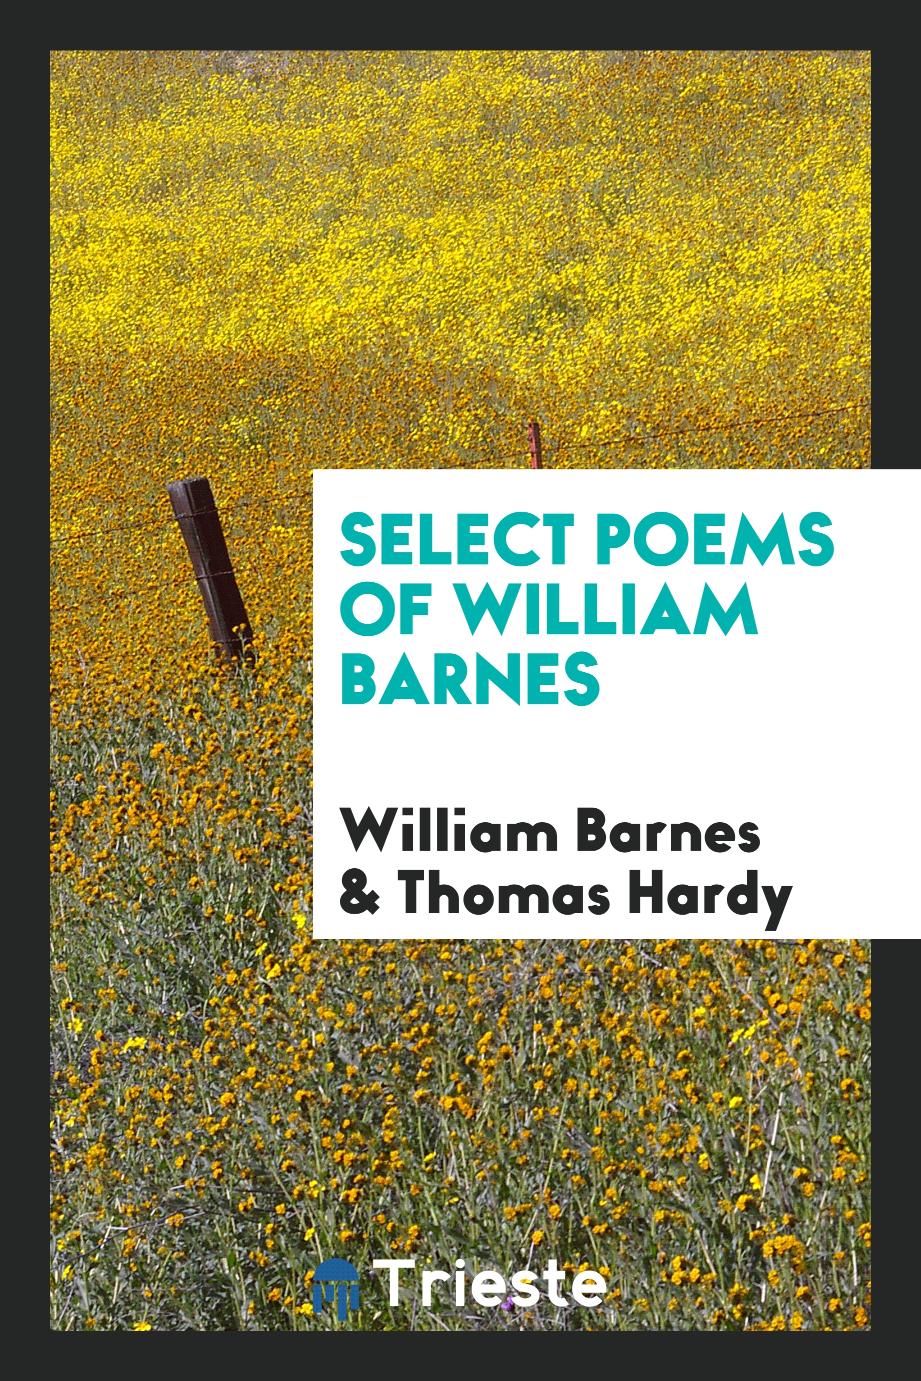 Select poems of William Barnes